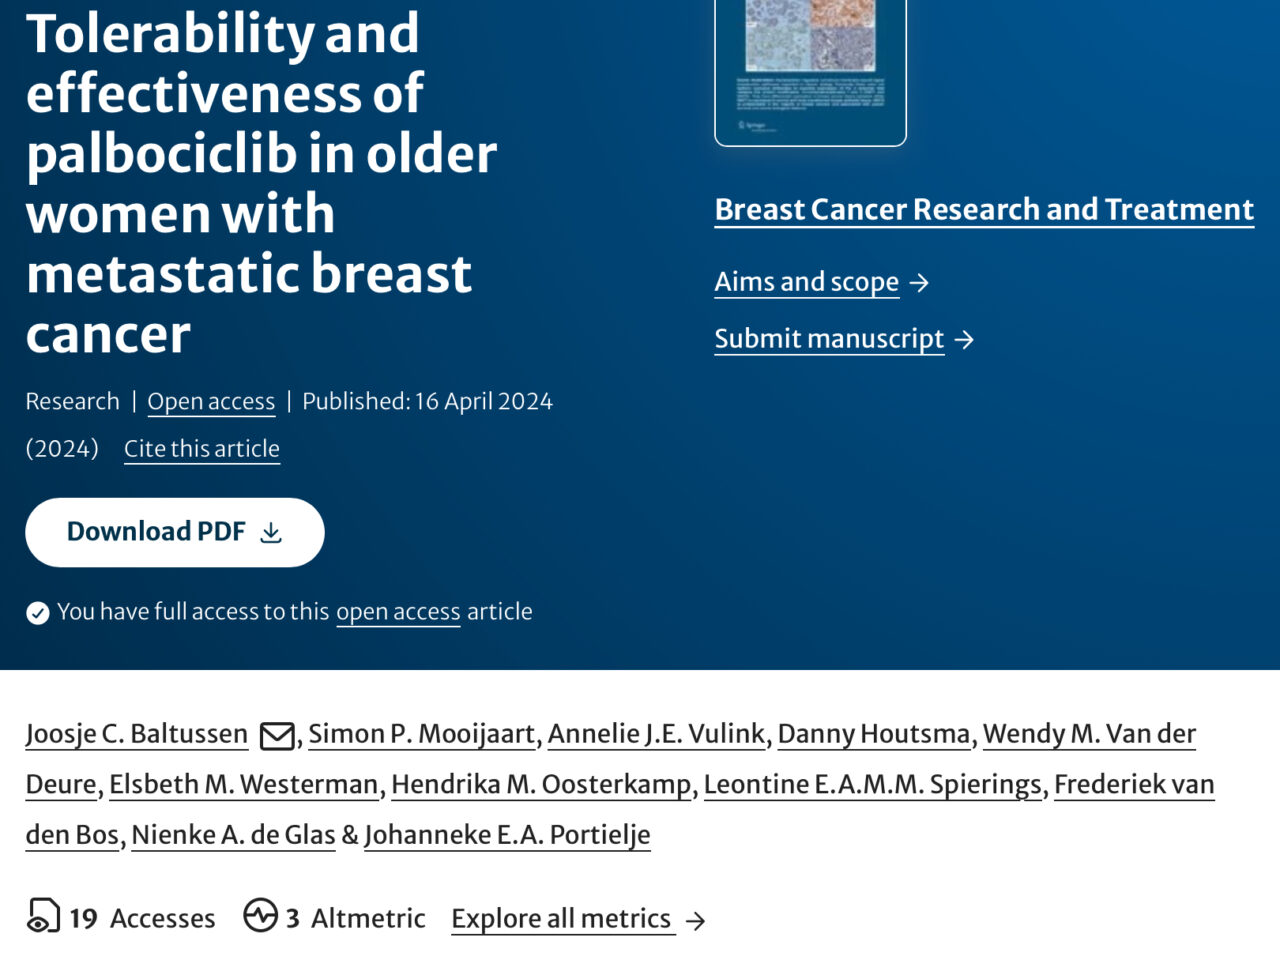 Joosje Baltussen: Our article studying tolerability and effectiveness of Palbociclib in older women with metastatic breast cancer